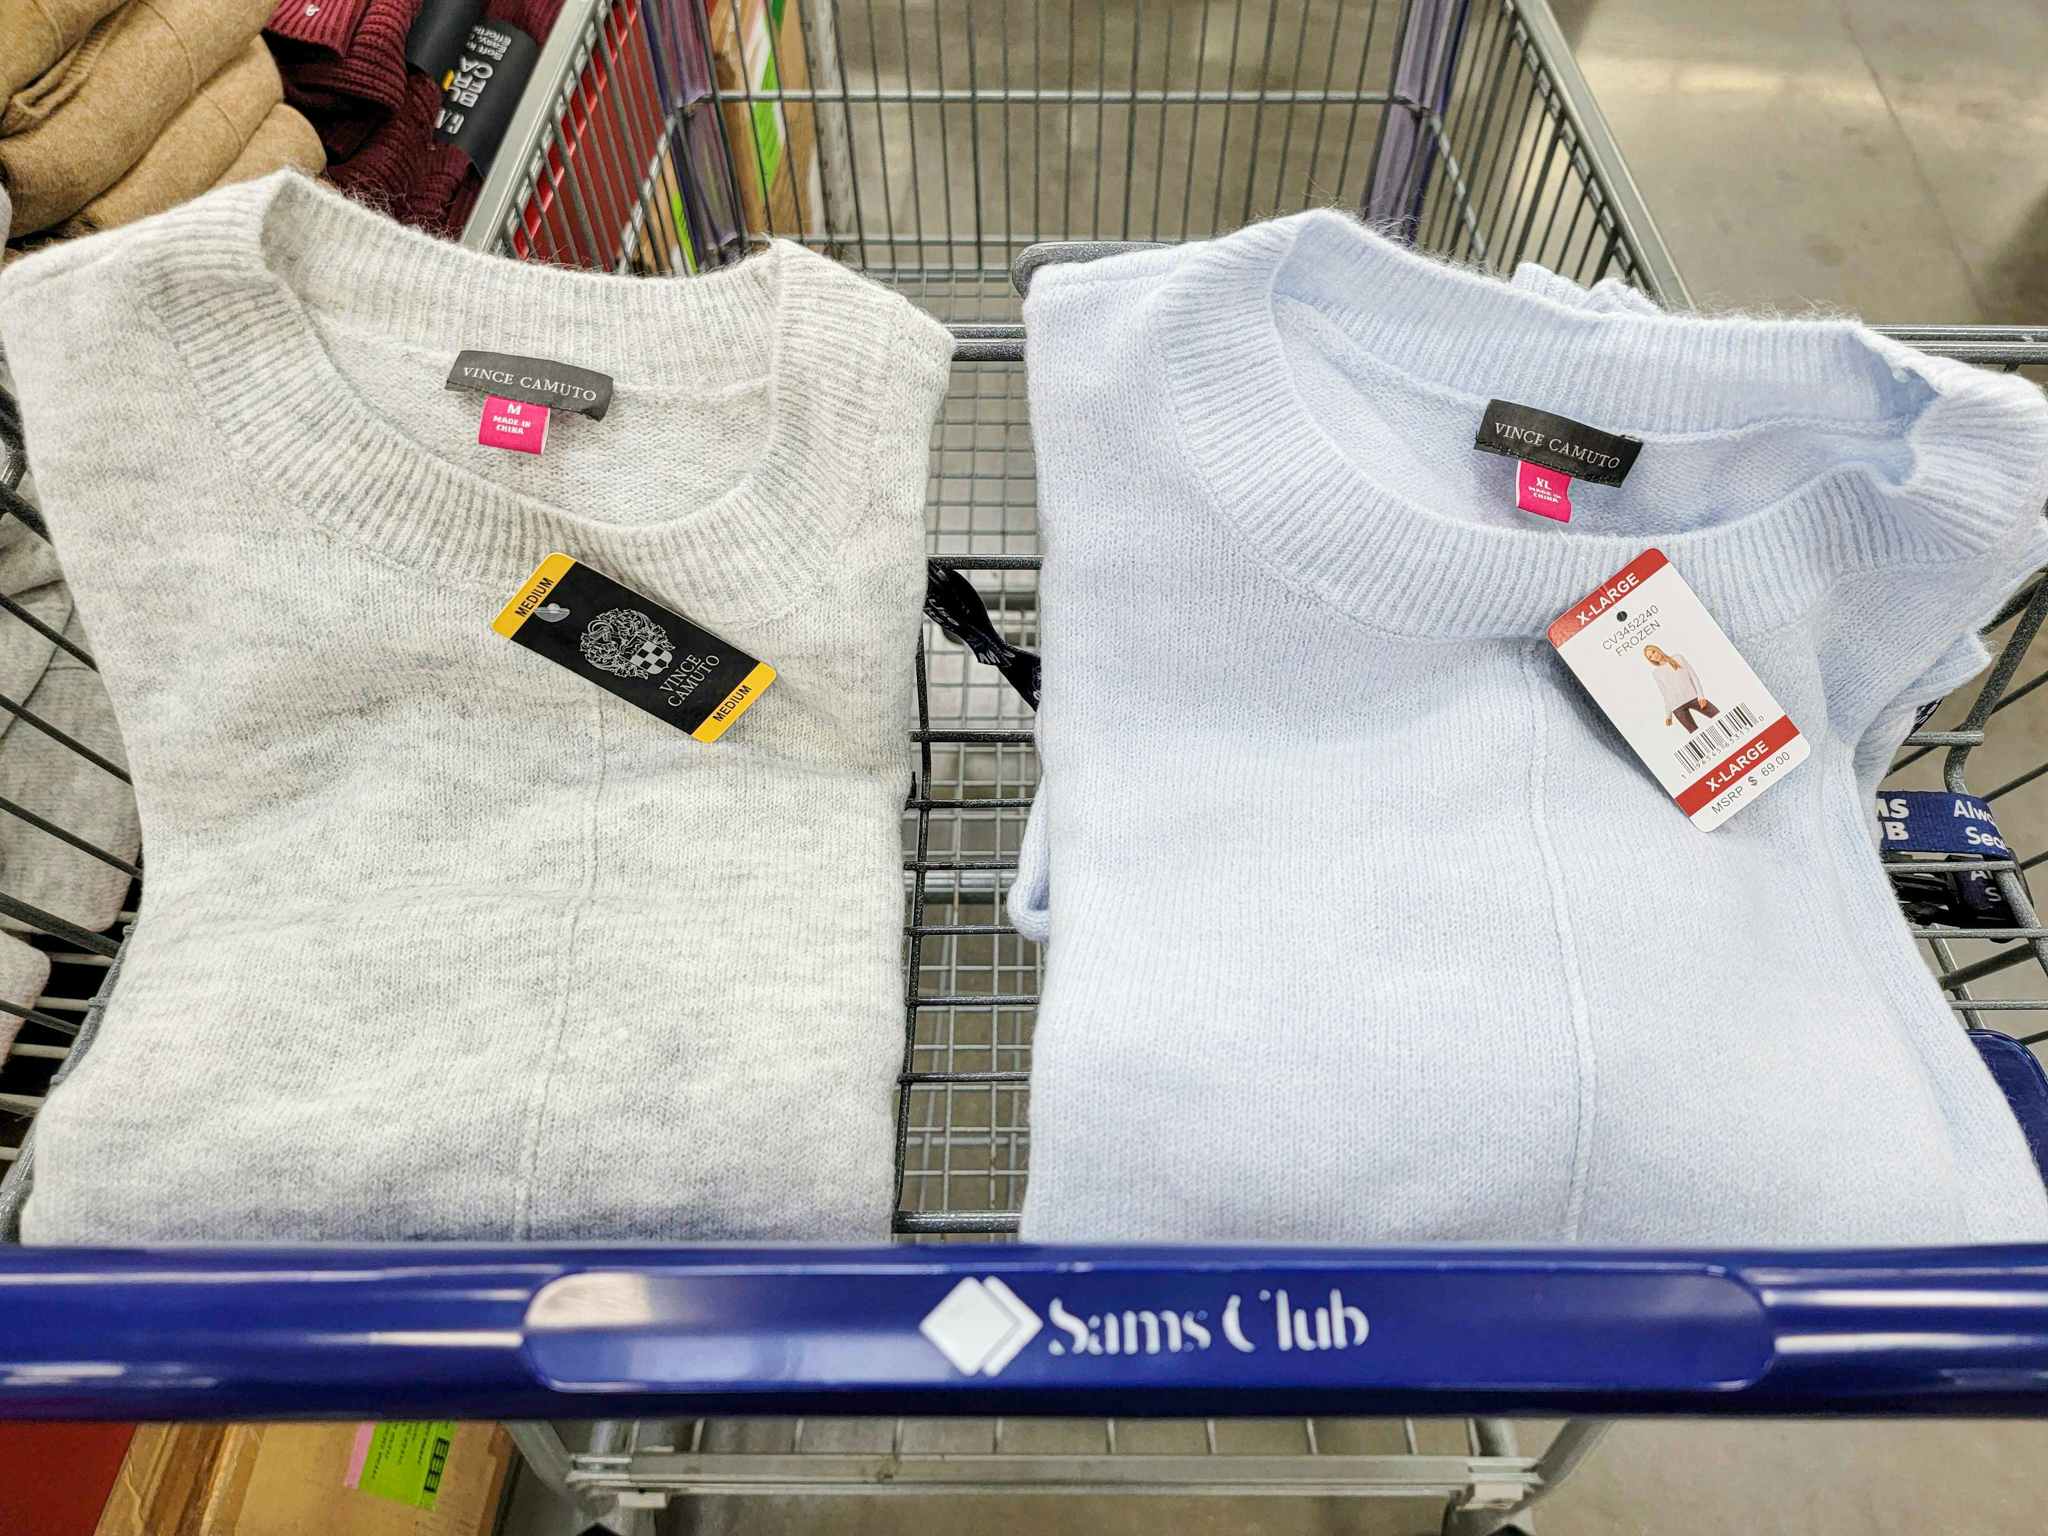 grey and light blue sweaters in a cart